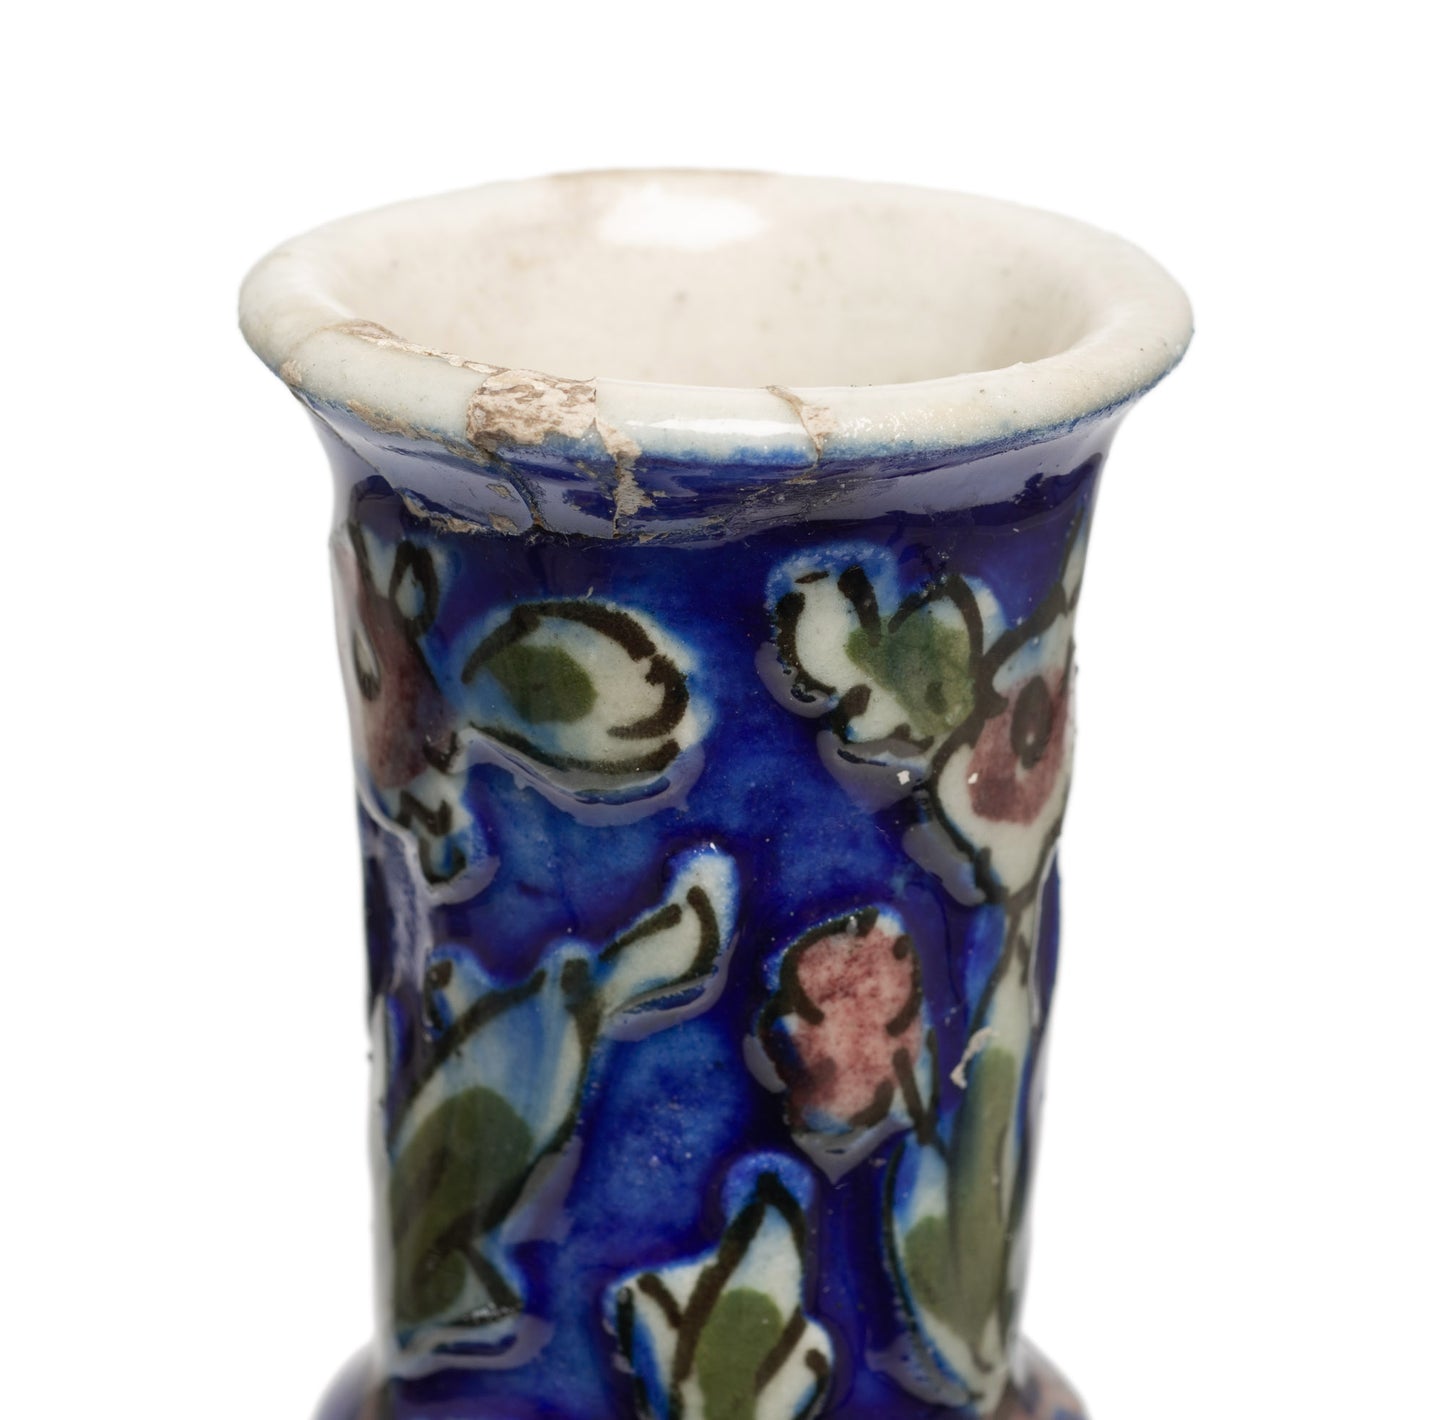 Antique Persian Qajar Carved Ground Vase in Cobalt Blue with Polychrome Birds (Code 2602)